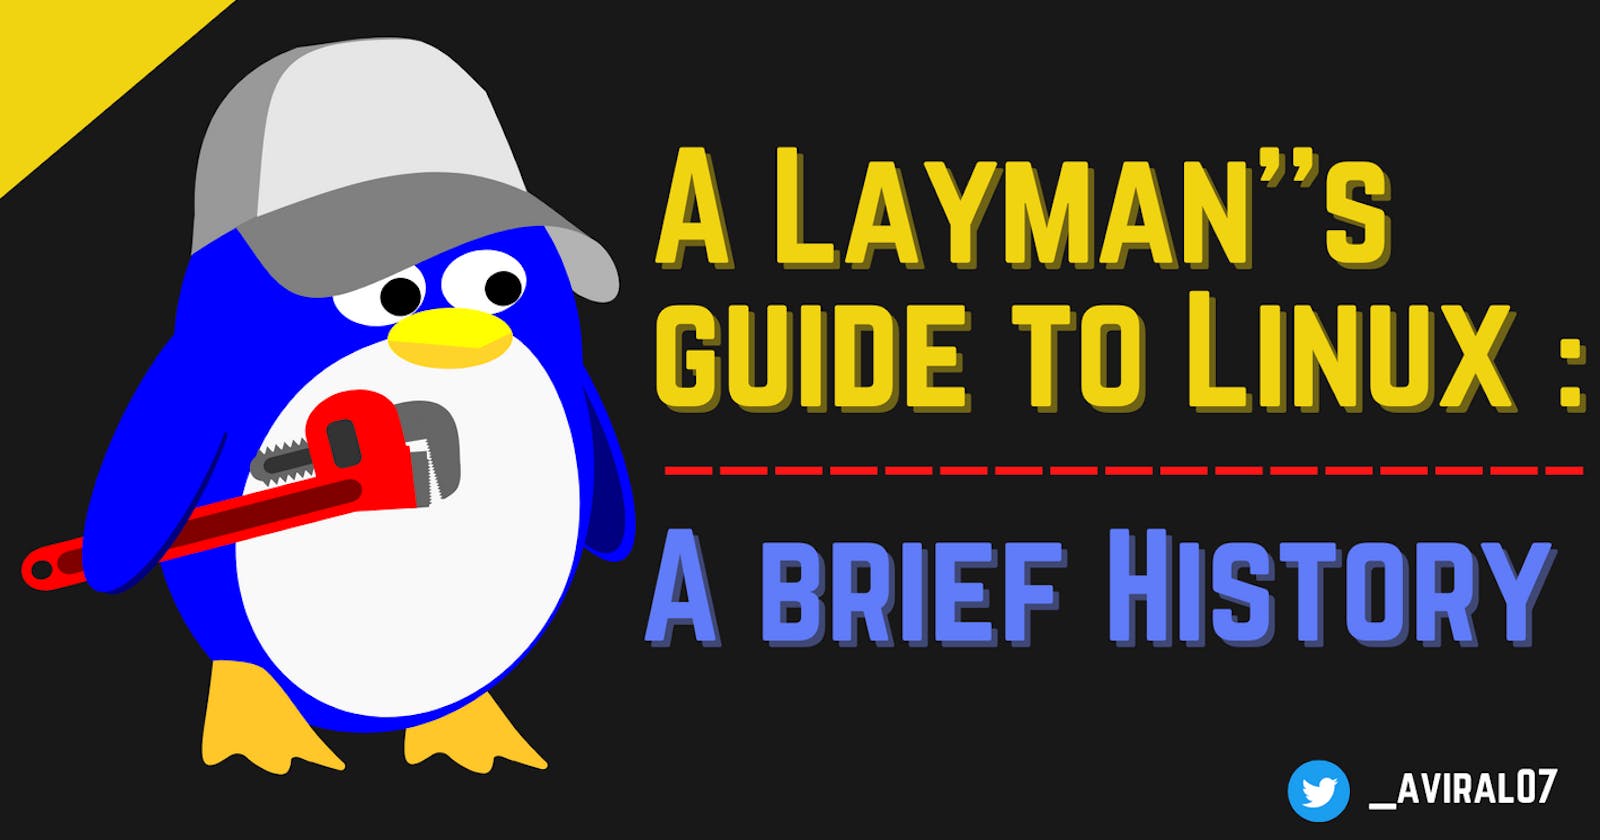 A Layman's Guide to Linux: A Brief History